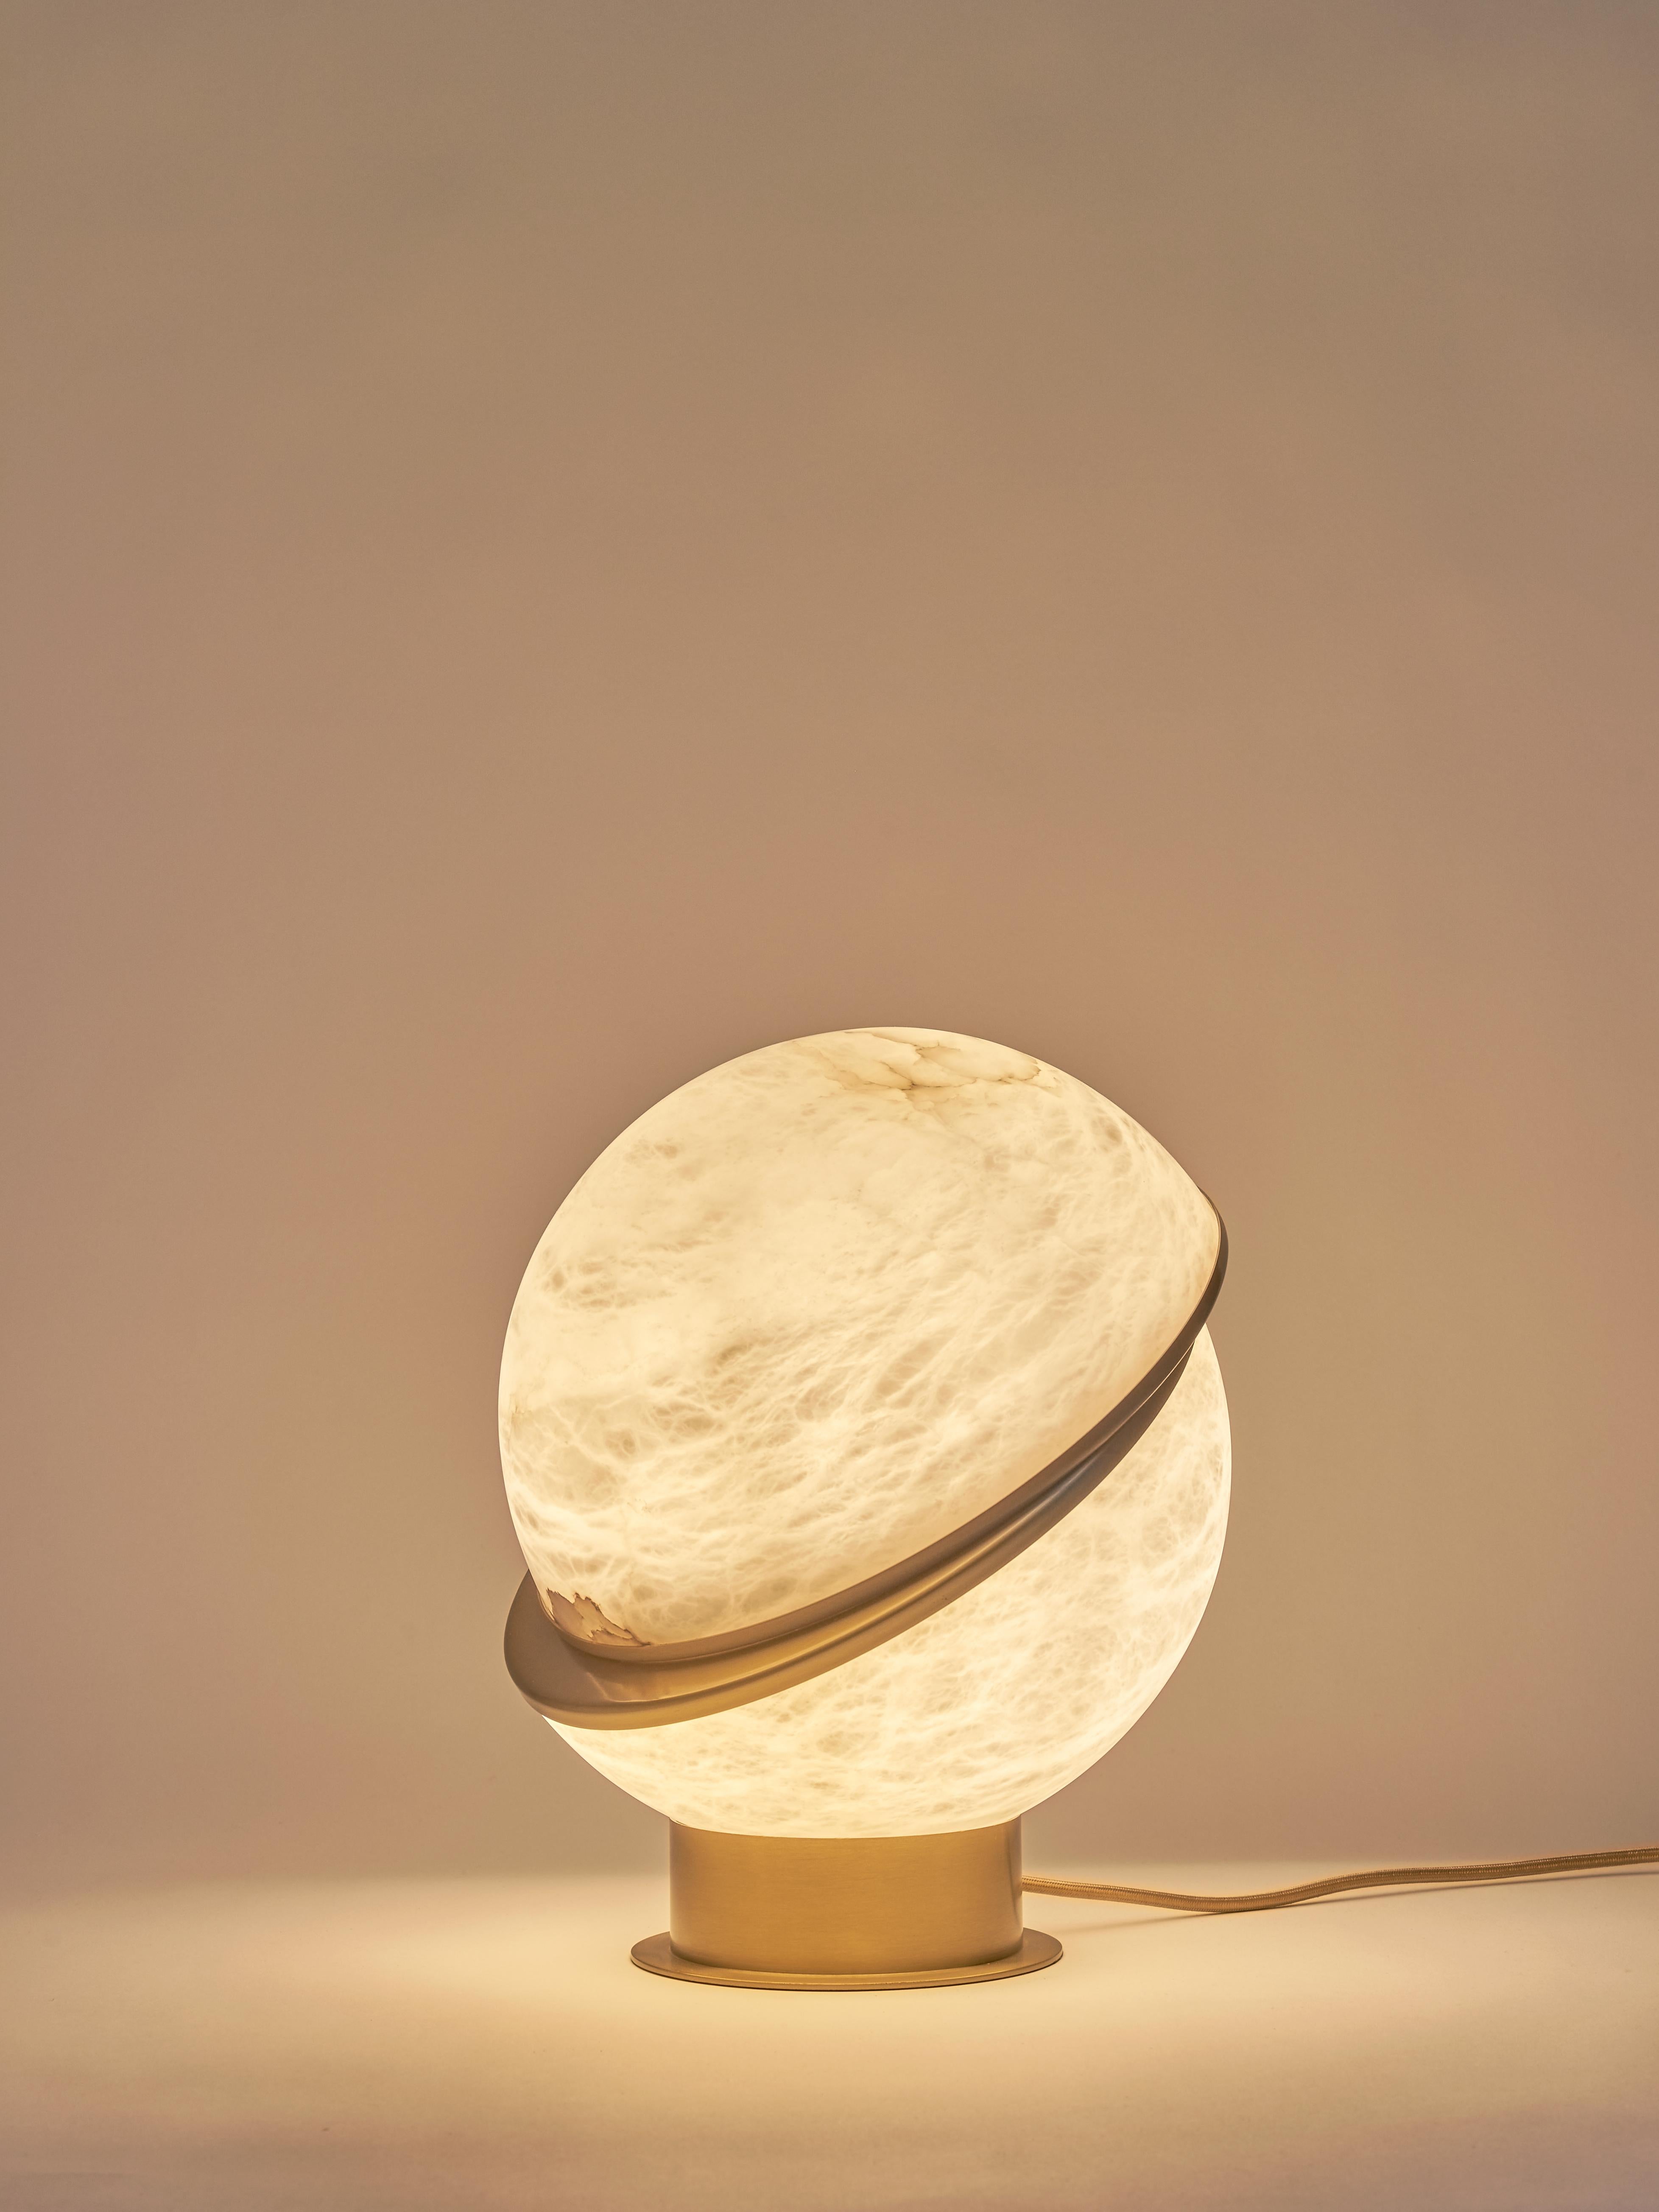 Galvanized Modern Italian Ethereal Allure of Alabaster - Offset Globe Lamp in satin brass For Sale